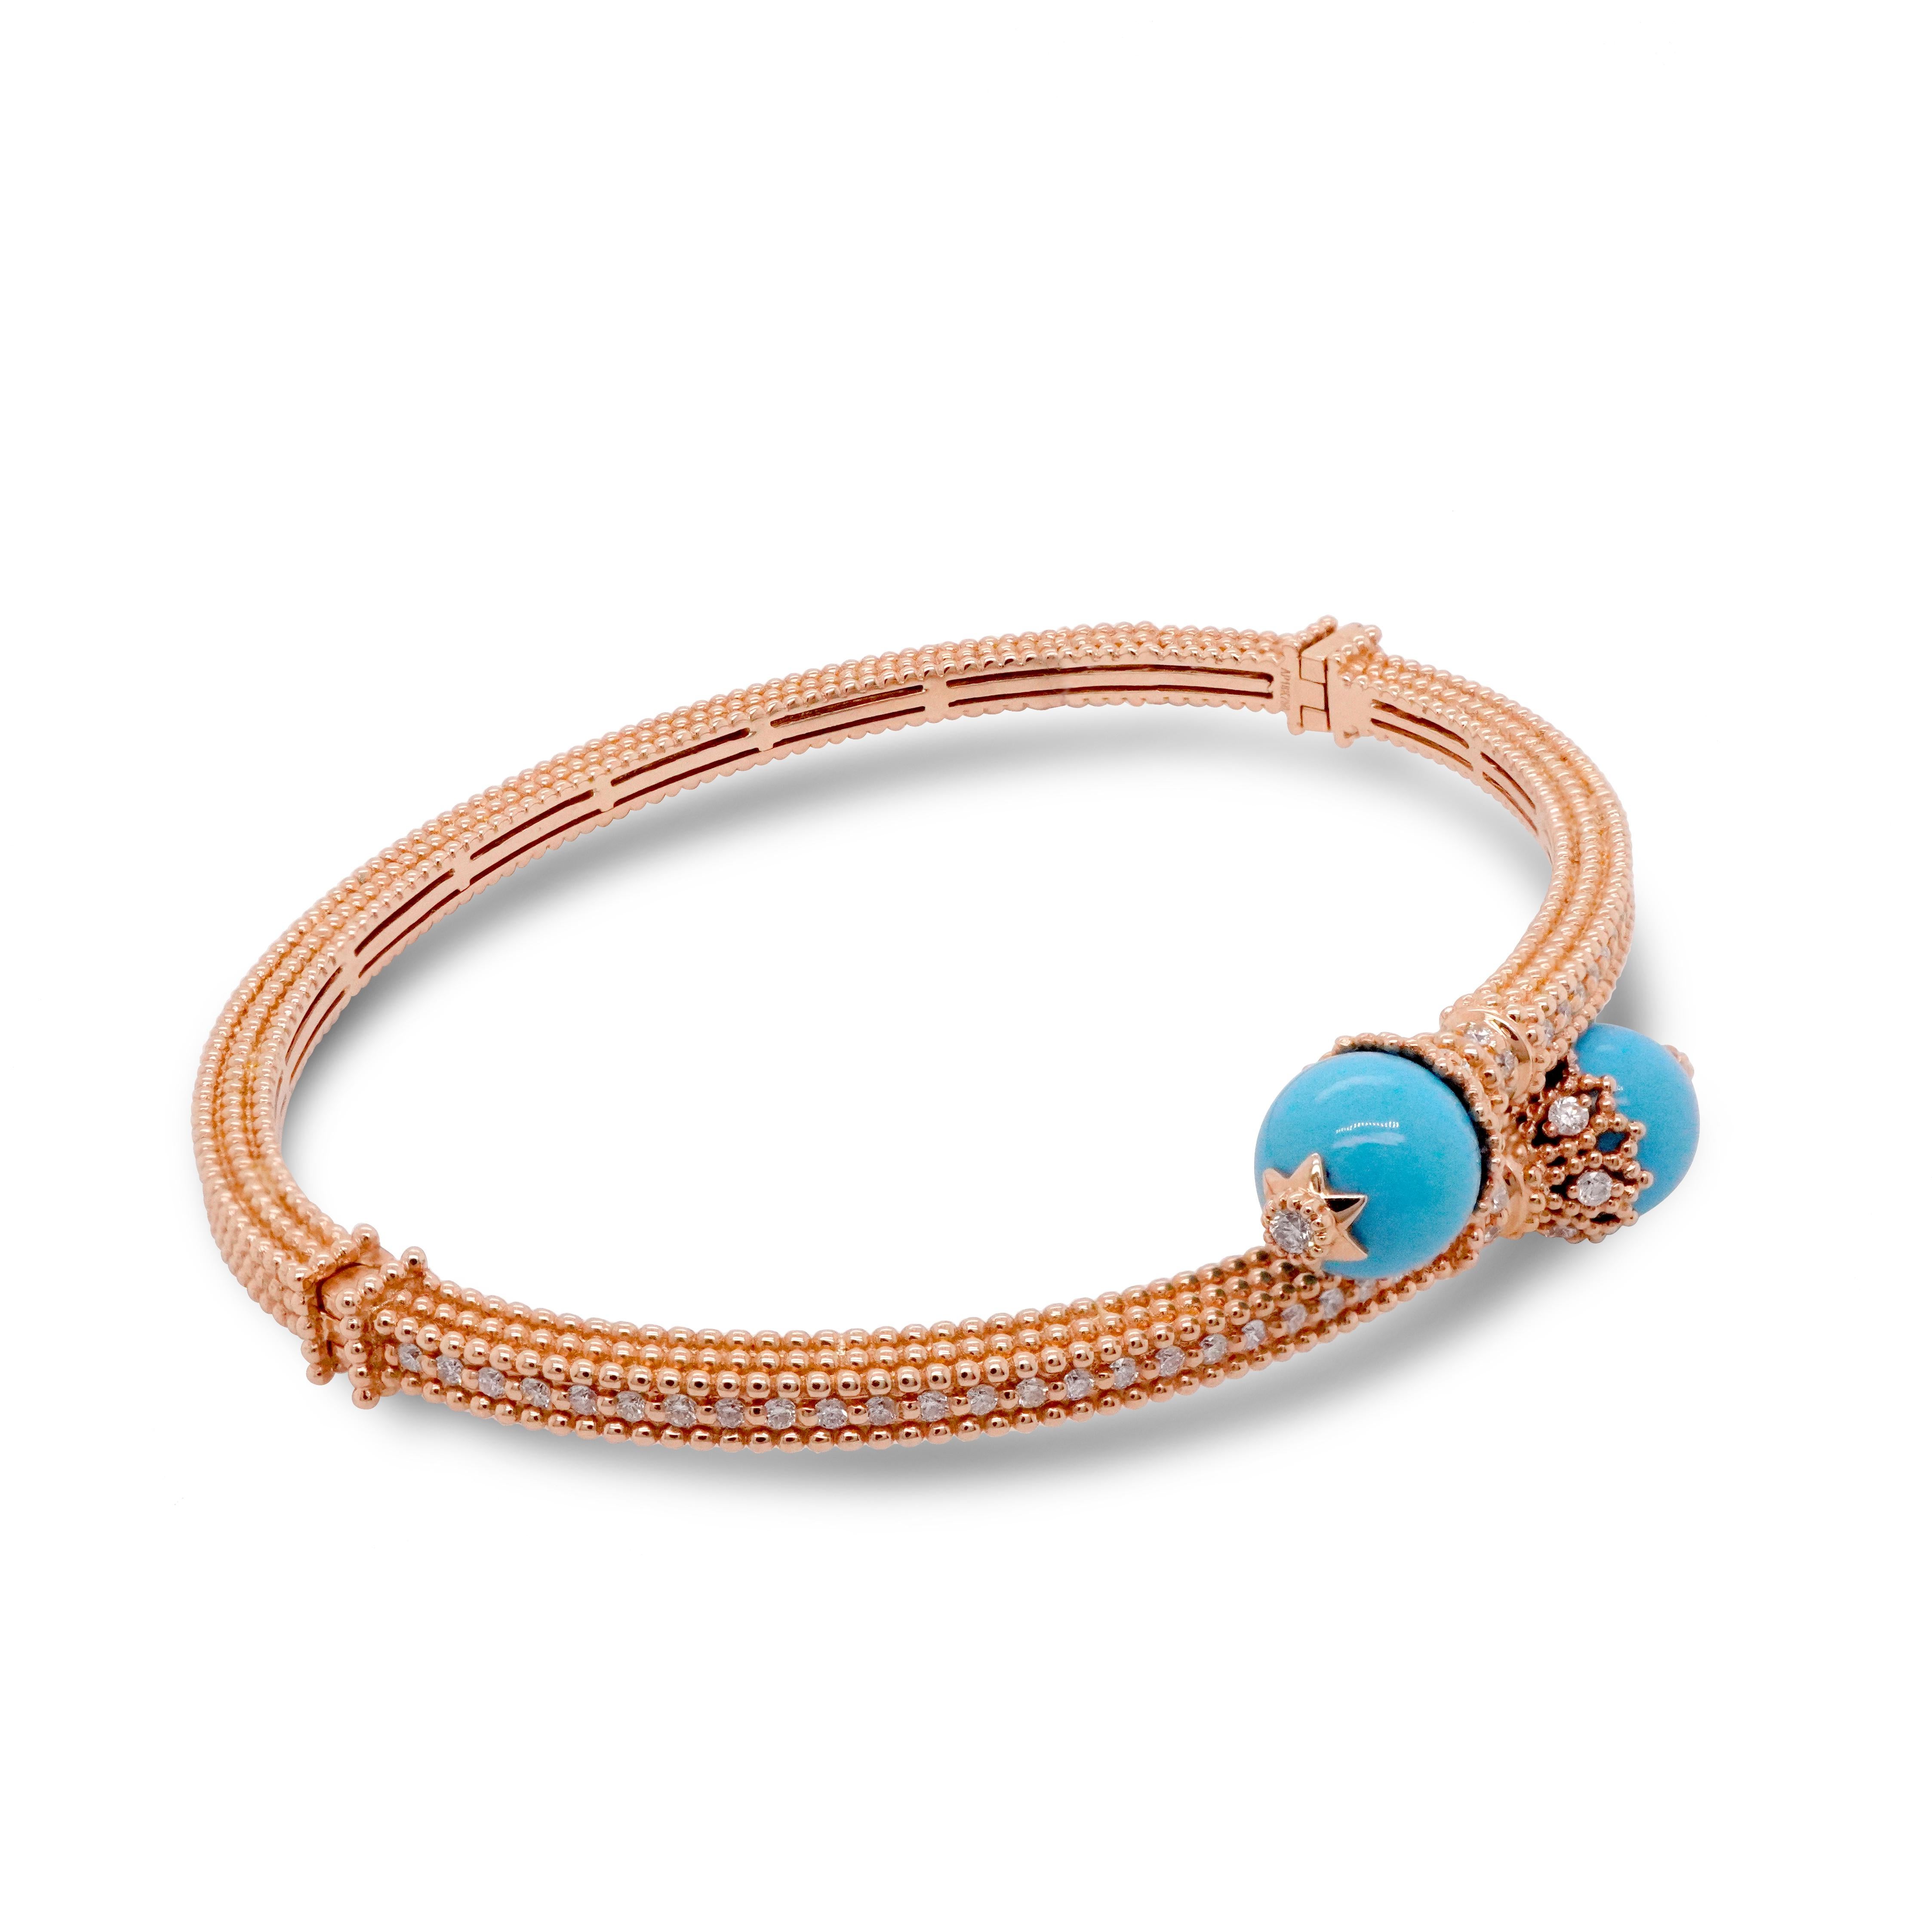 18K Rose Gold Art Deco Diamond Bangle

18K Rose Gold - 19.28 GM
76 Diamonds - 0.75 CT
2 Synthetic Turquoises - 0.8 GM

The details of this bangle will surely amaze you. When modern design meets Art Deco, it's more than a bangle. It's a piece of art